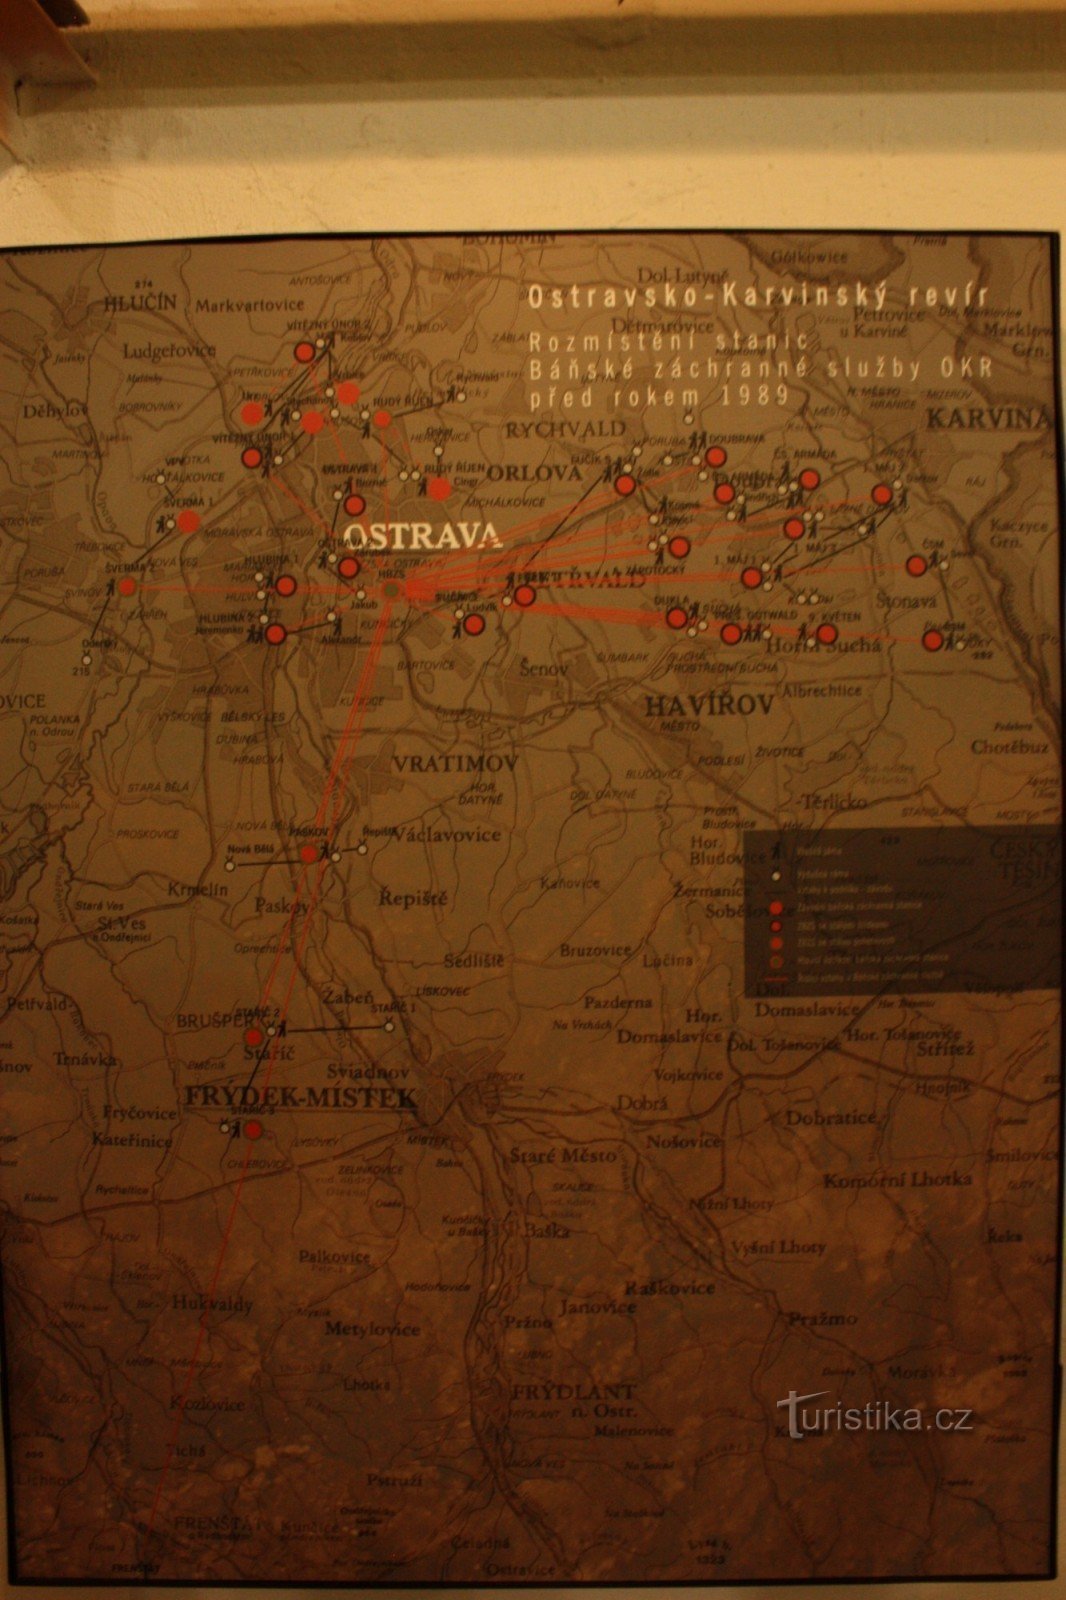 Location of mining rescue service stations within OKD before 1989